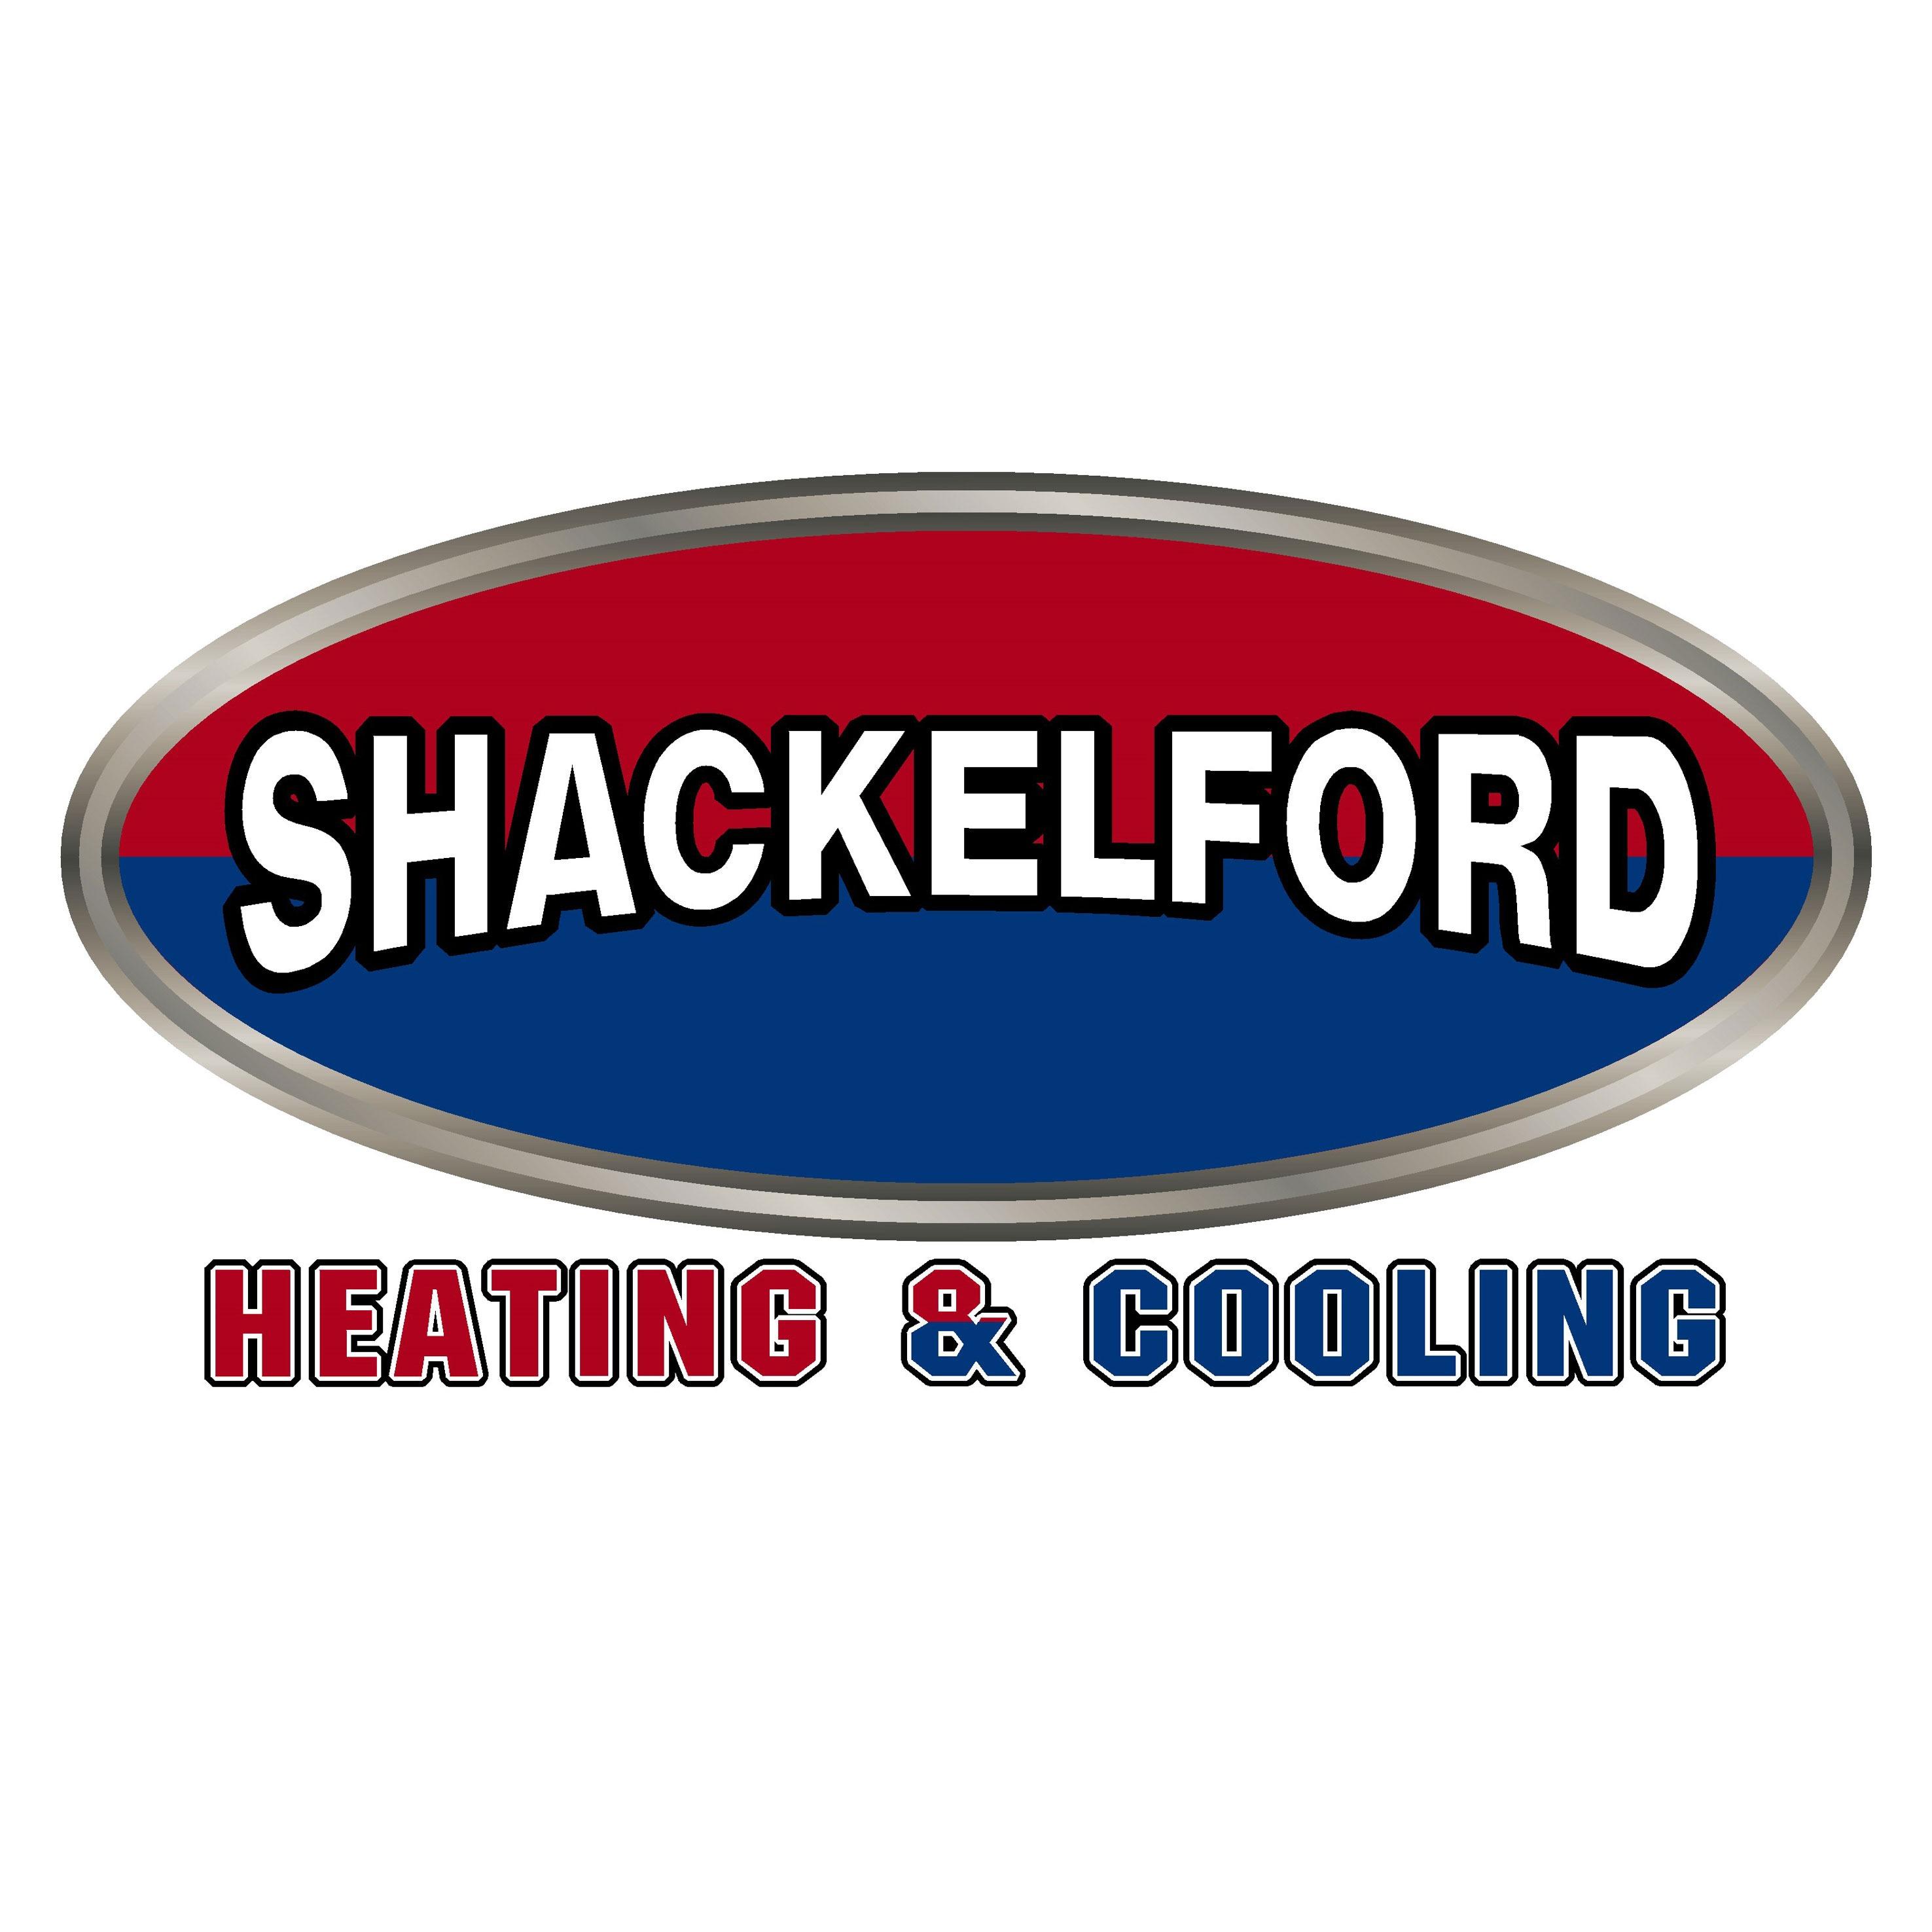 Shackelford Heating & Cooling - Fitchburg, WI 53711 - (608)835-7755 | ShowMeLocal.com